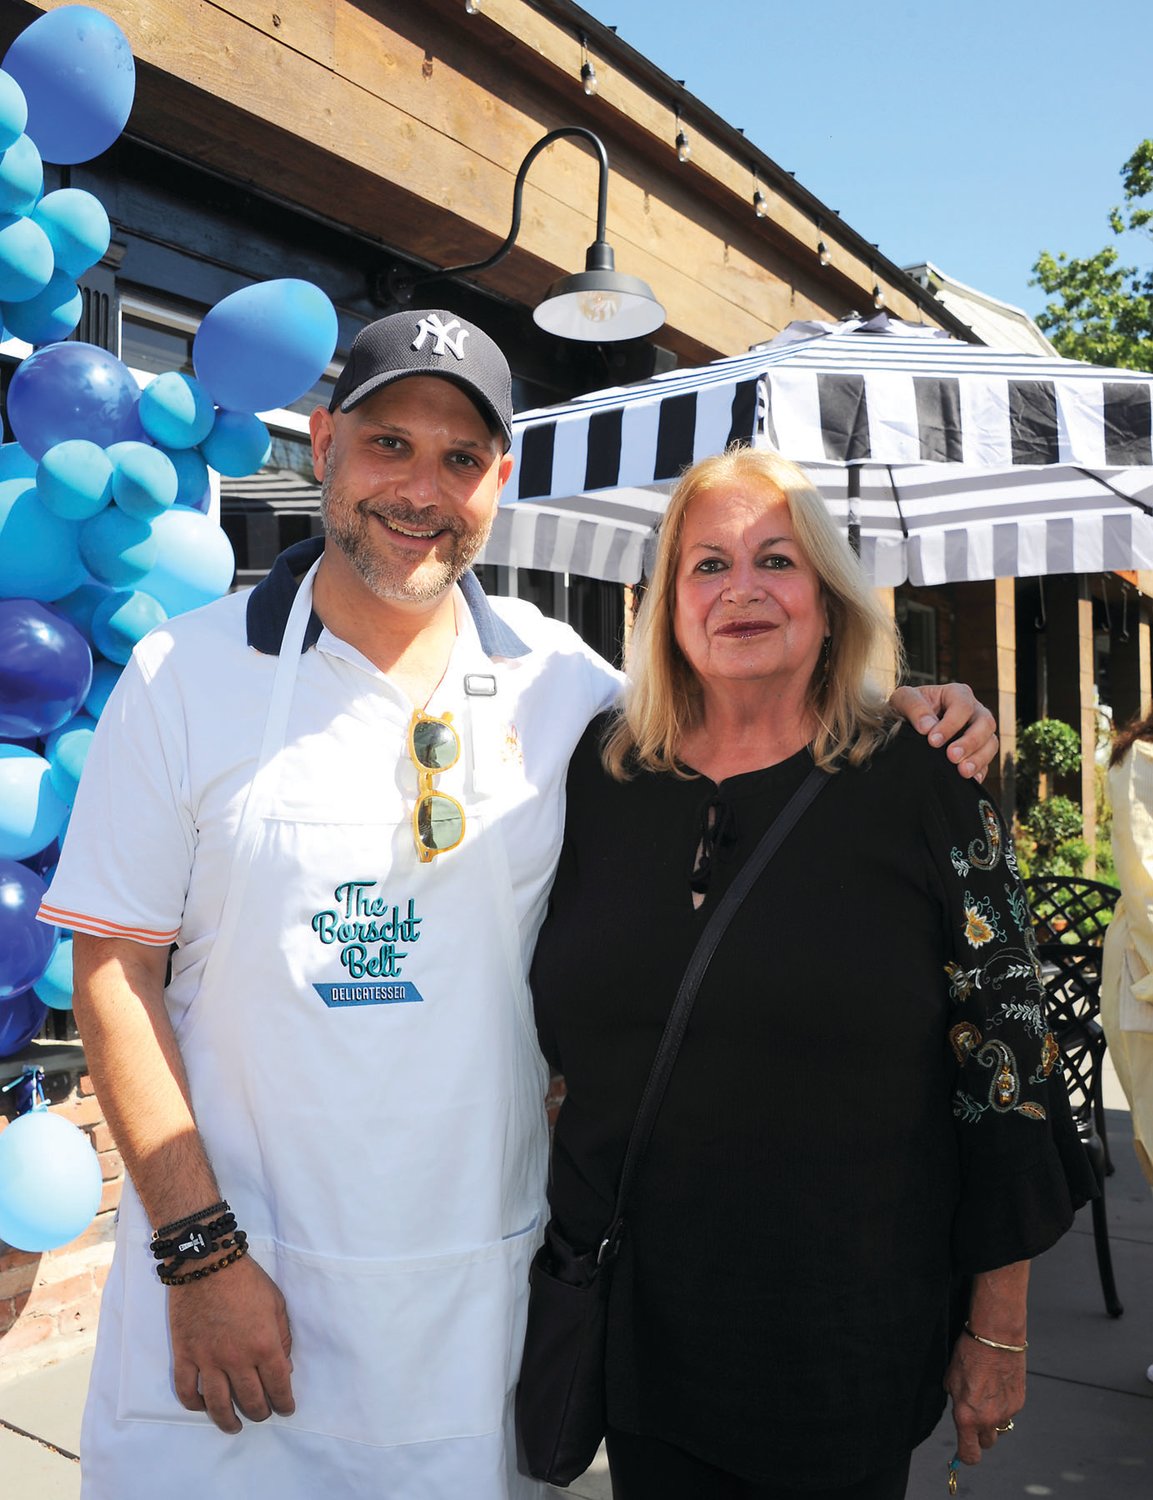 The Borsch Belt co-founder Mike Dalewitz and Jane Wesby, president of the Greater Lambertville Chamber of Commerce.